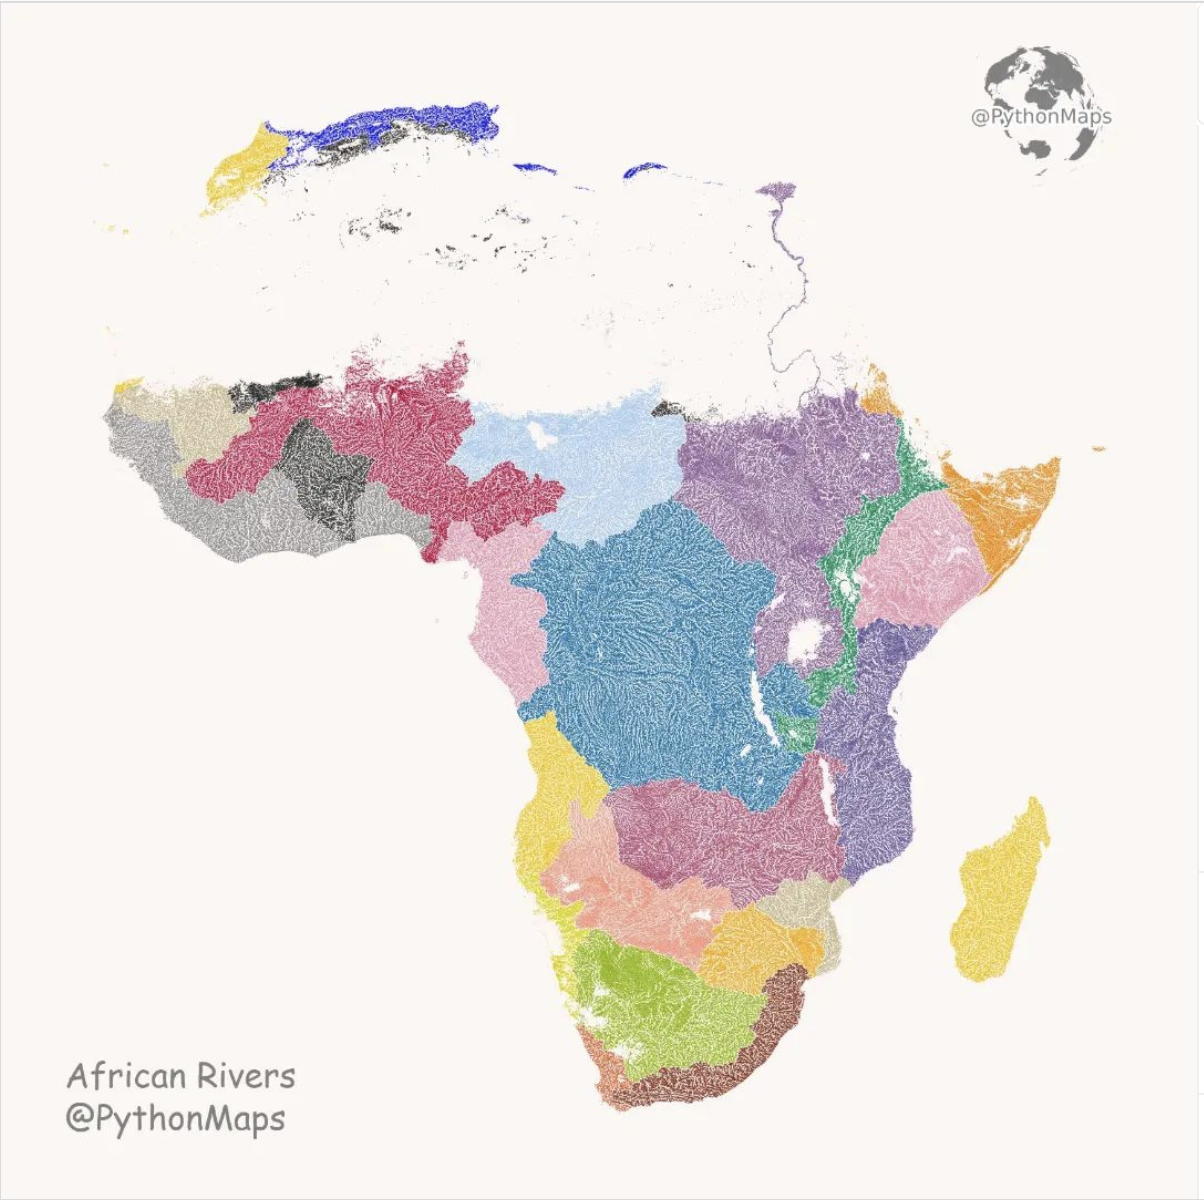 A 2D Python map shows the waterways in Africa color coded according to their source